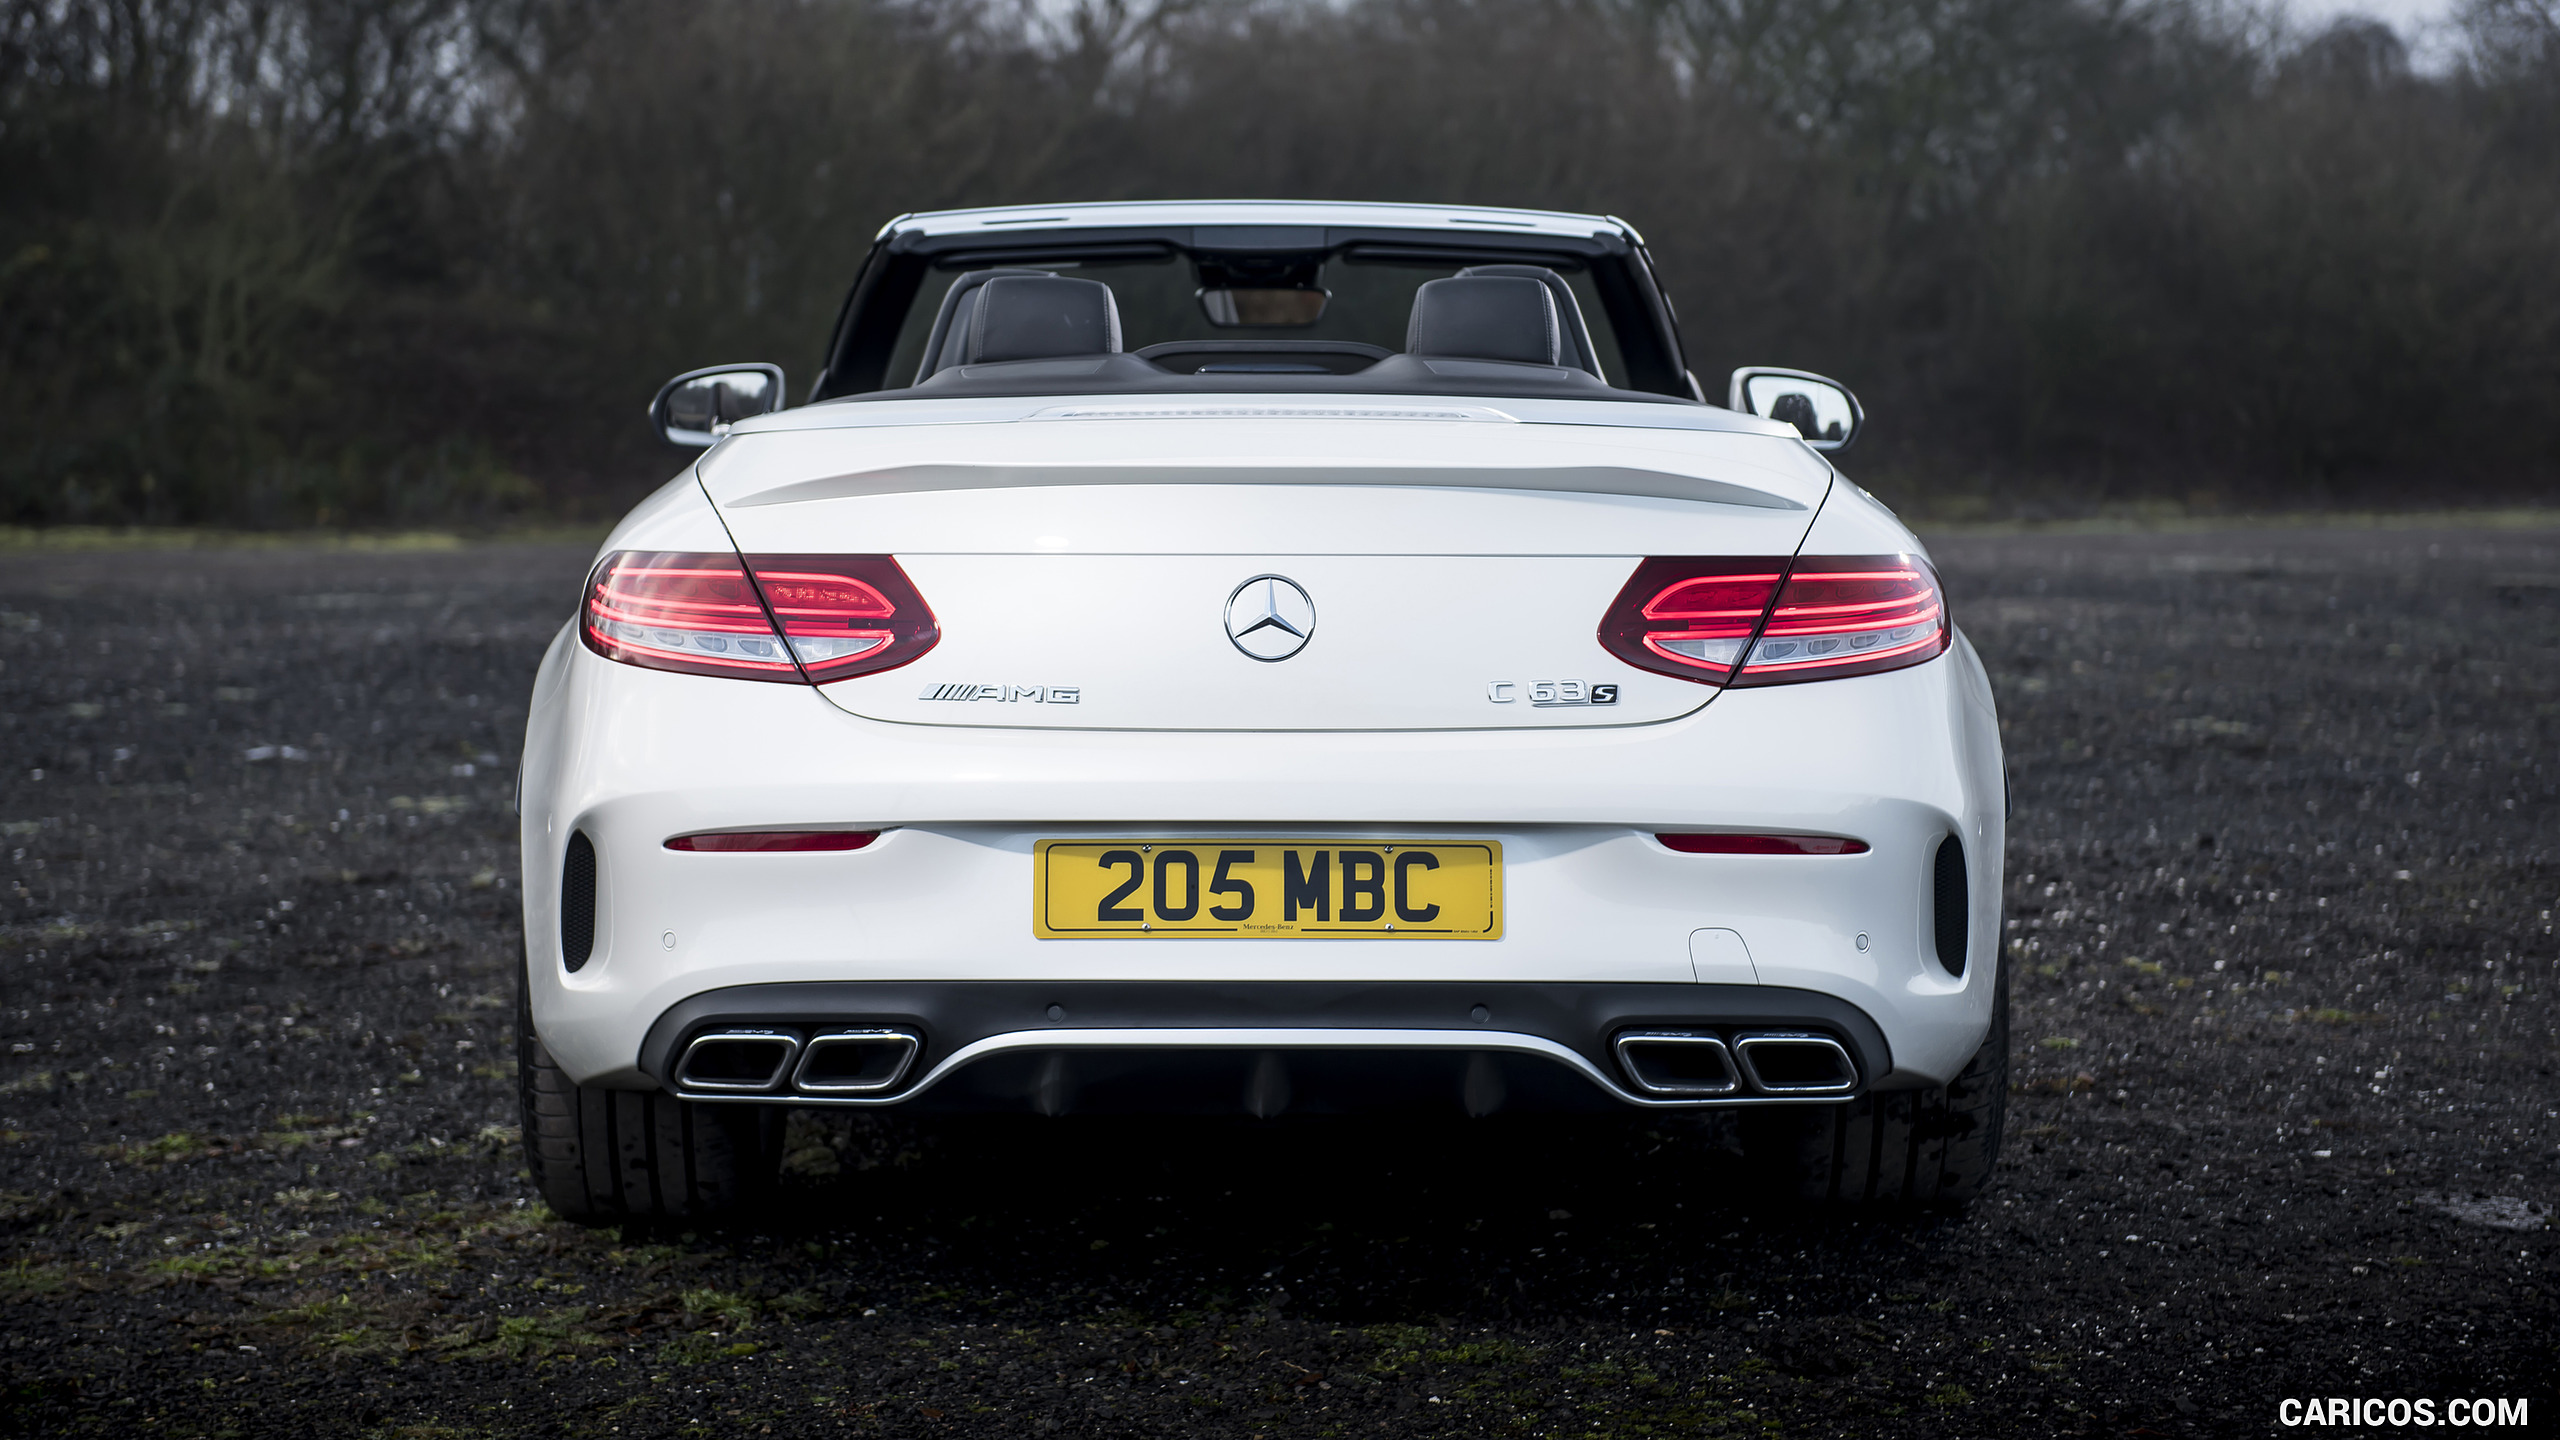 2017 Mercedes-AMG C63 S Cabriolet (UK-Spec) - Top Down - Rear, #25 of 50